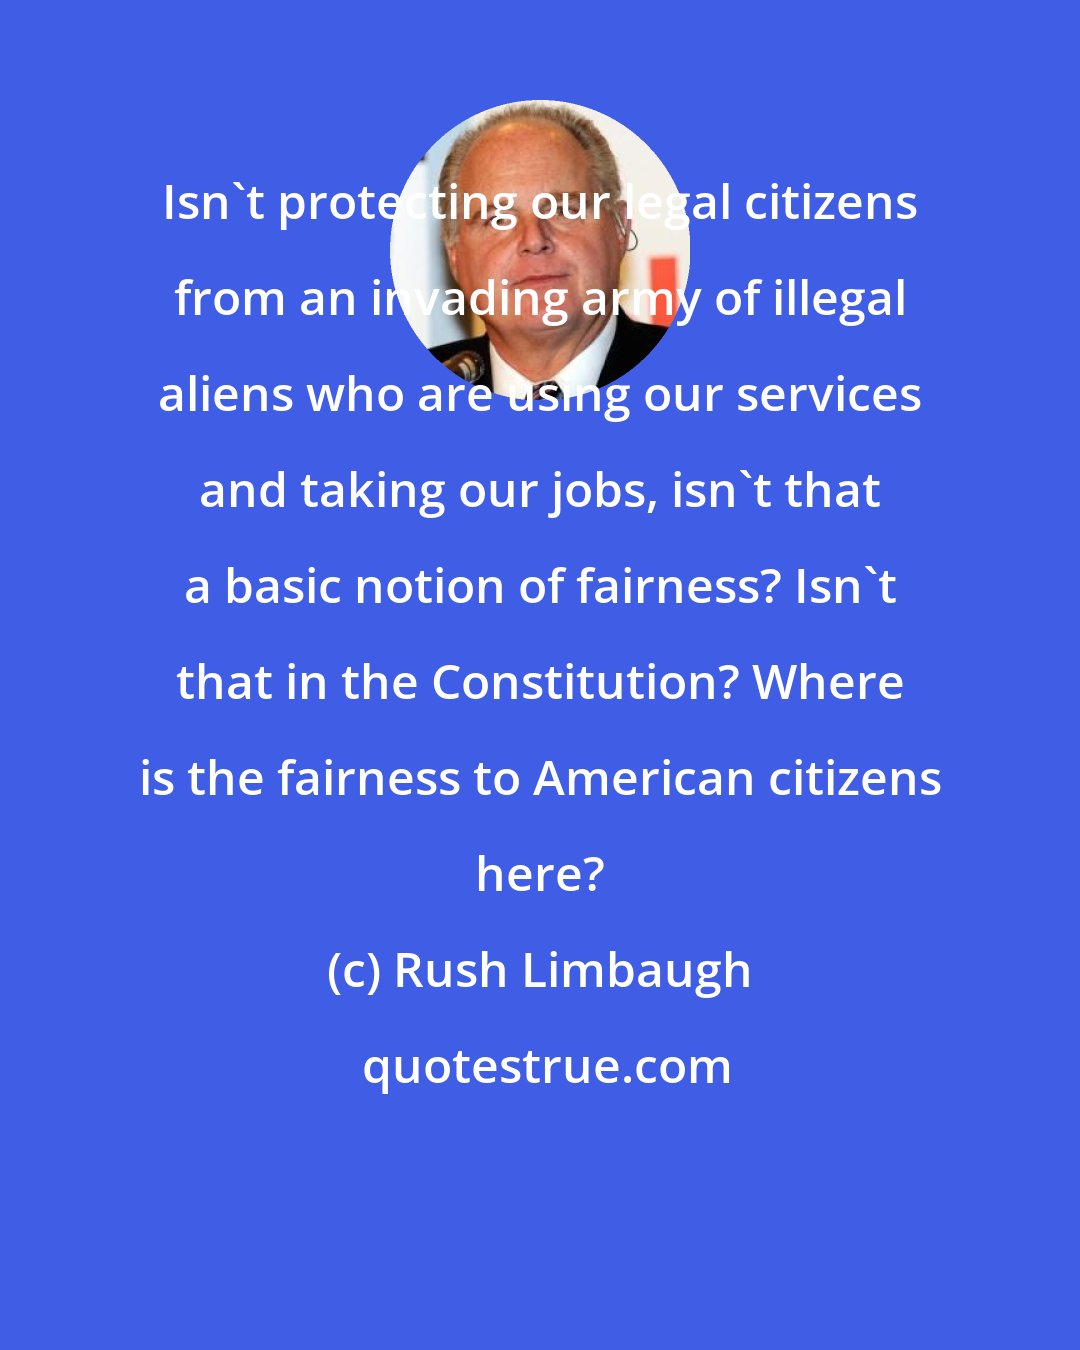 Rush Limbaugh: Isn't protecting our legal citizens from an invading army of illegal aliens who are using our services and taking our jobs, isn't that a basic notion of fairness? Isn't that in the Constitution? Where is the fairness to American citizens here?